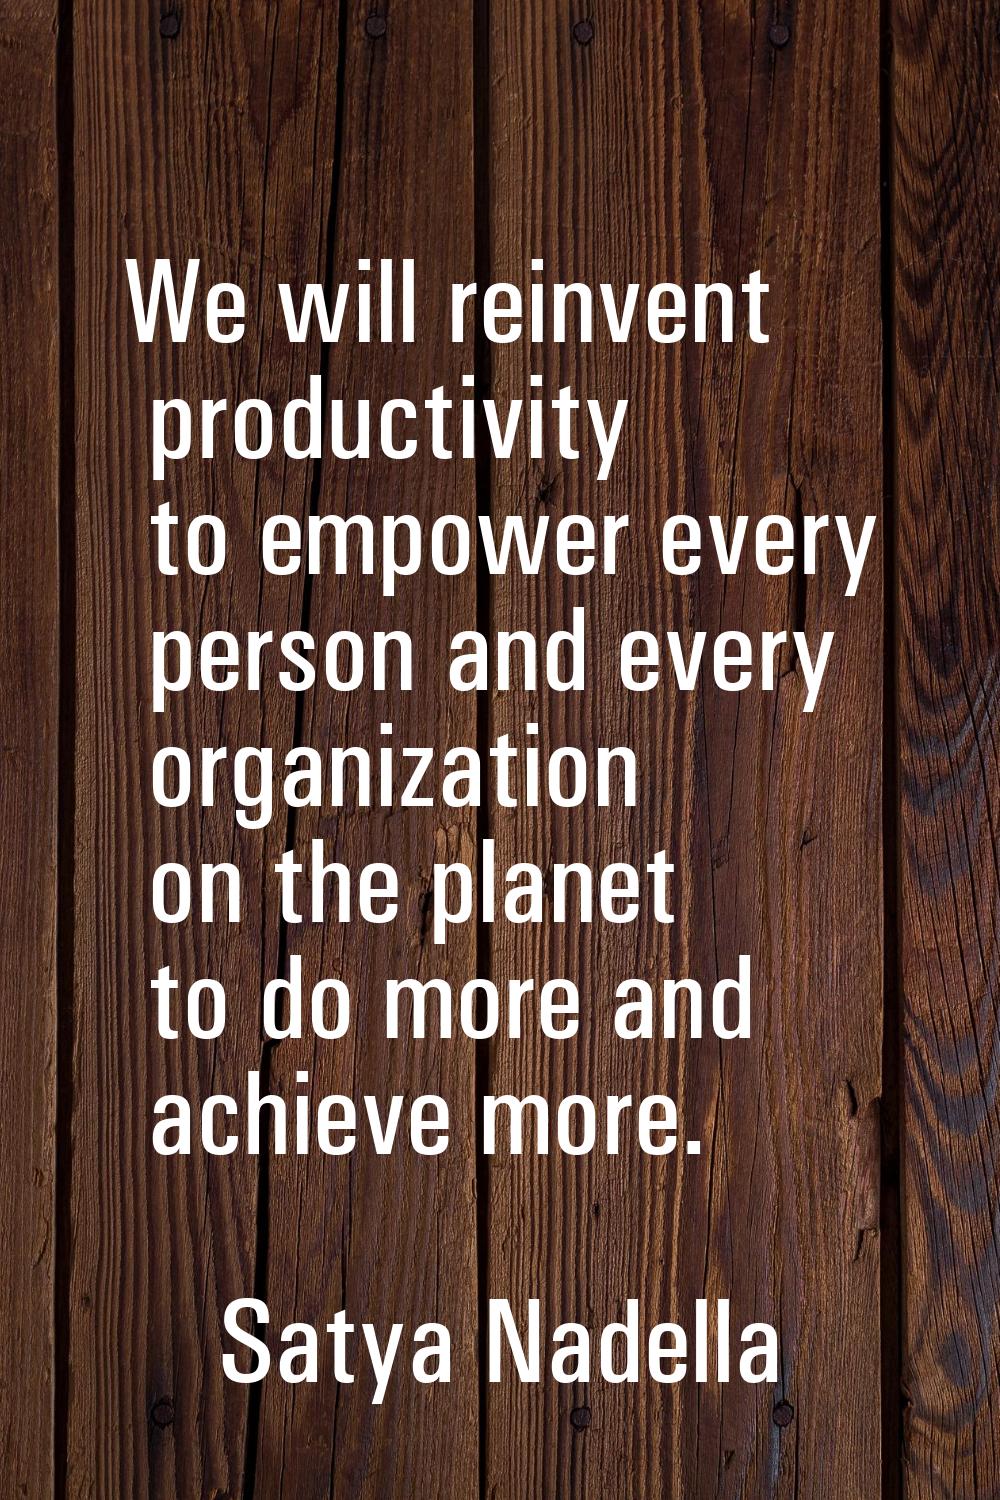 We will reinvent productivity to empower every person and every organization on the planet to do mo